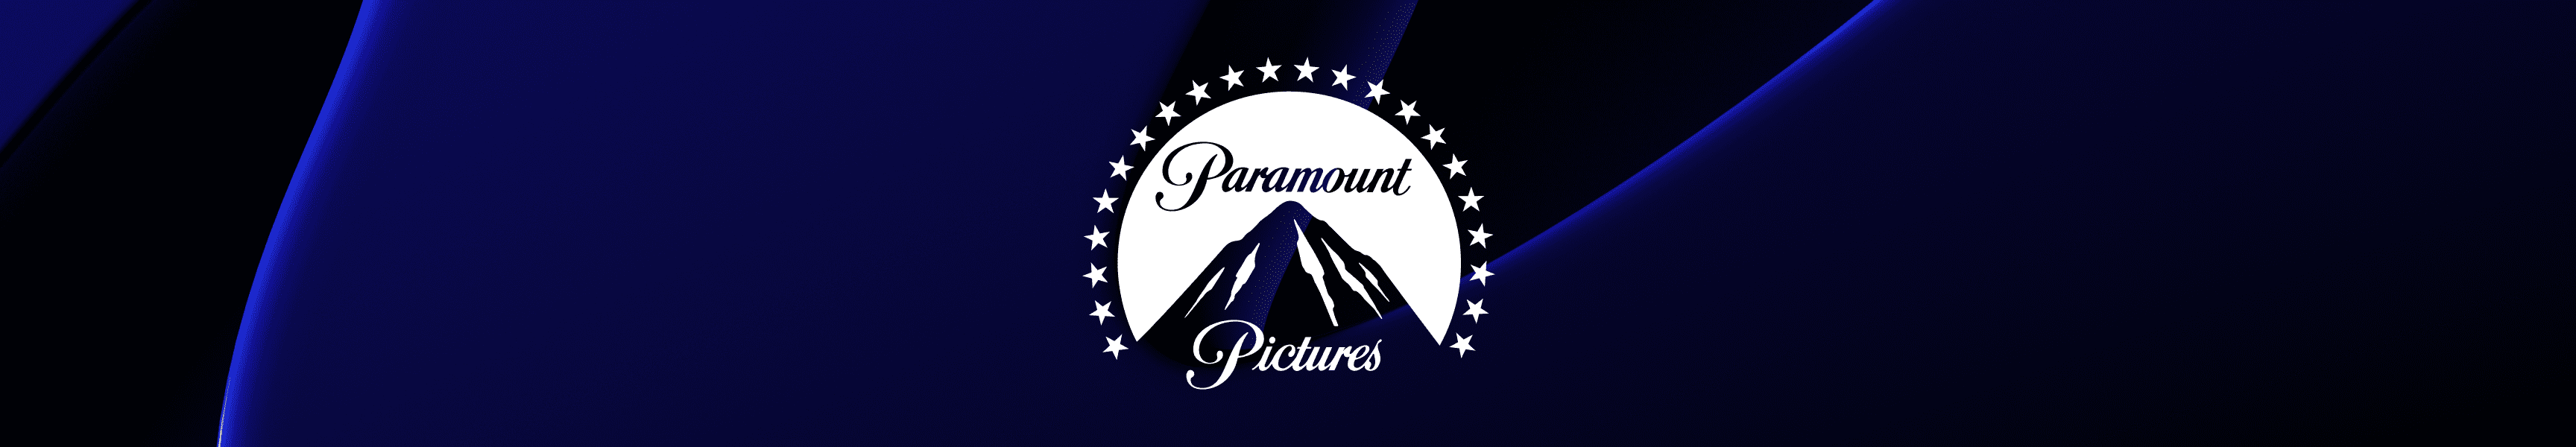 Paramount Pictures Gobelets